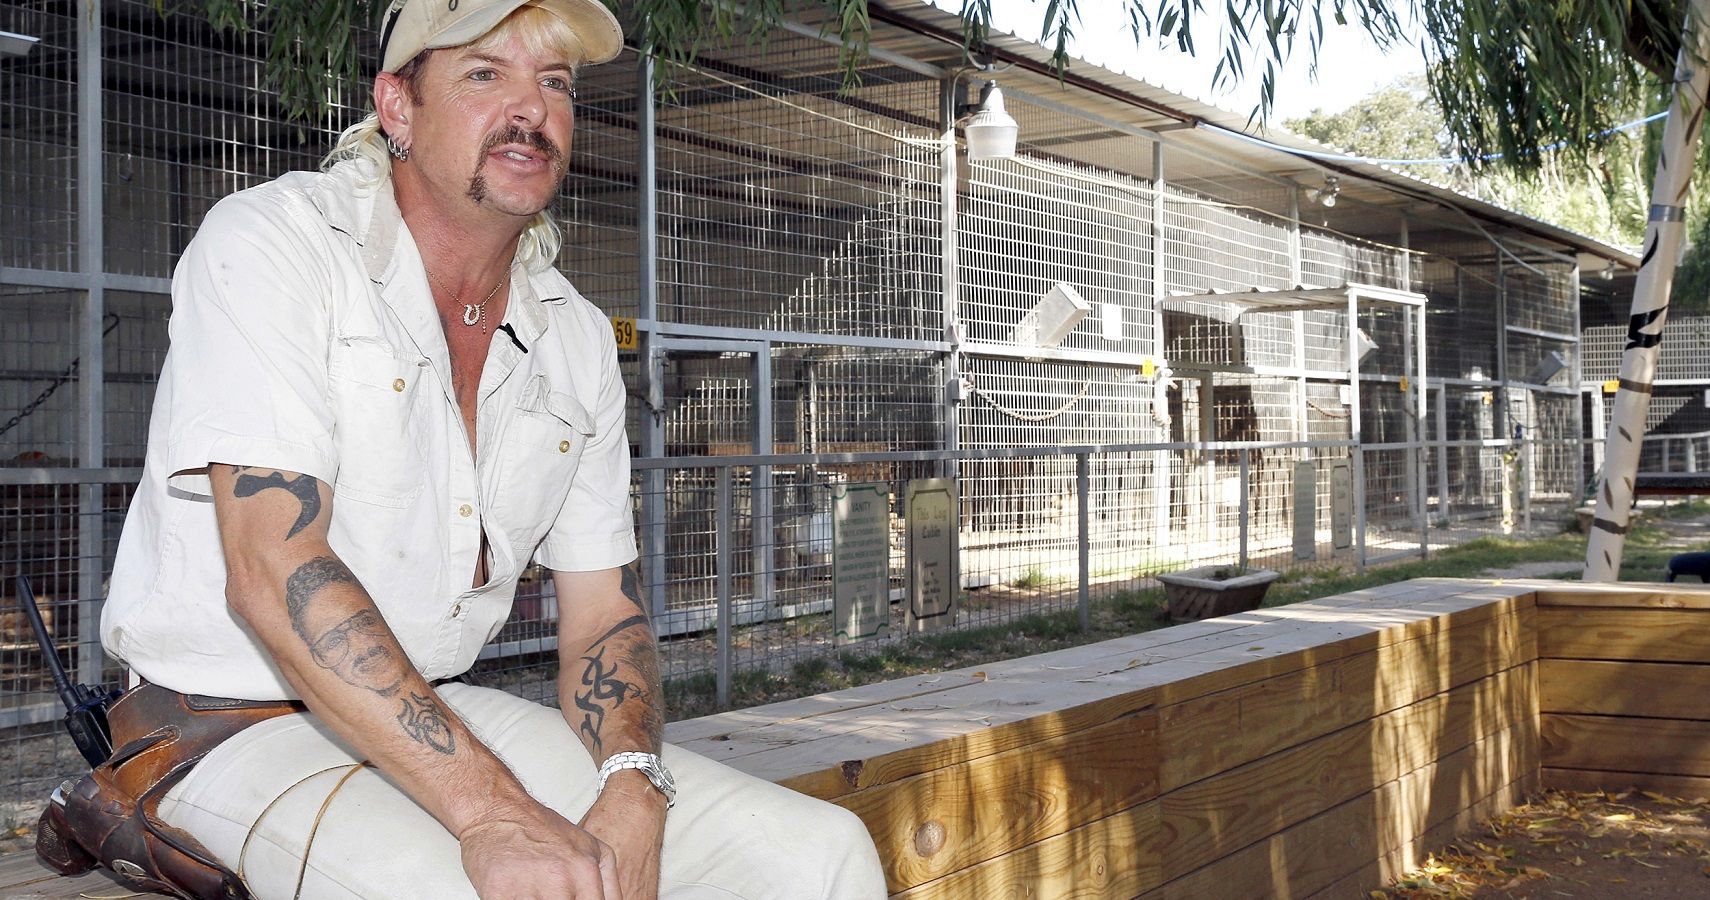 Tiger King Joe Exotic's face now appears on a cheeky line of